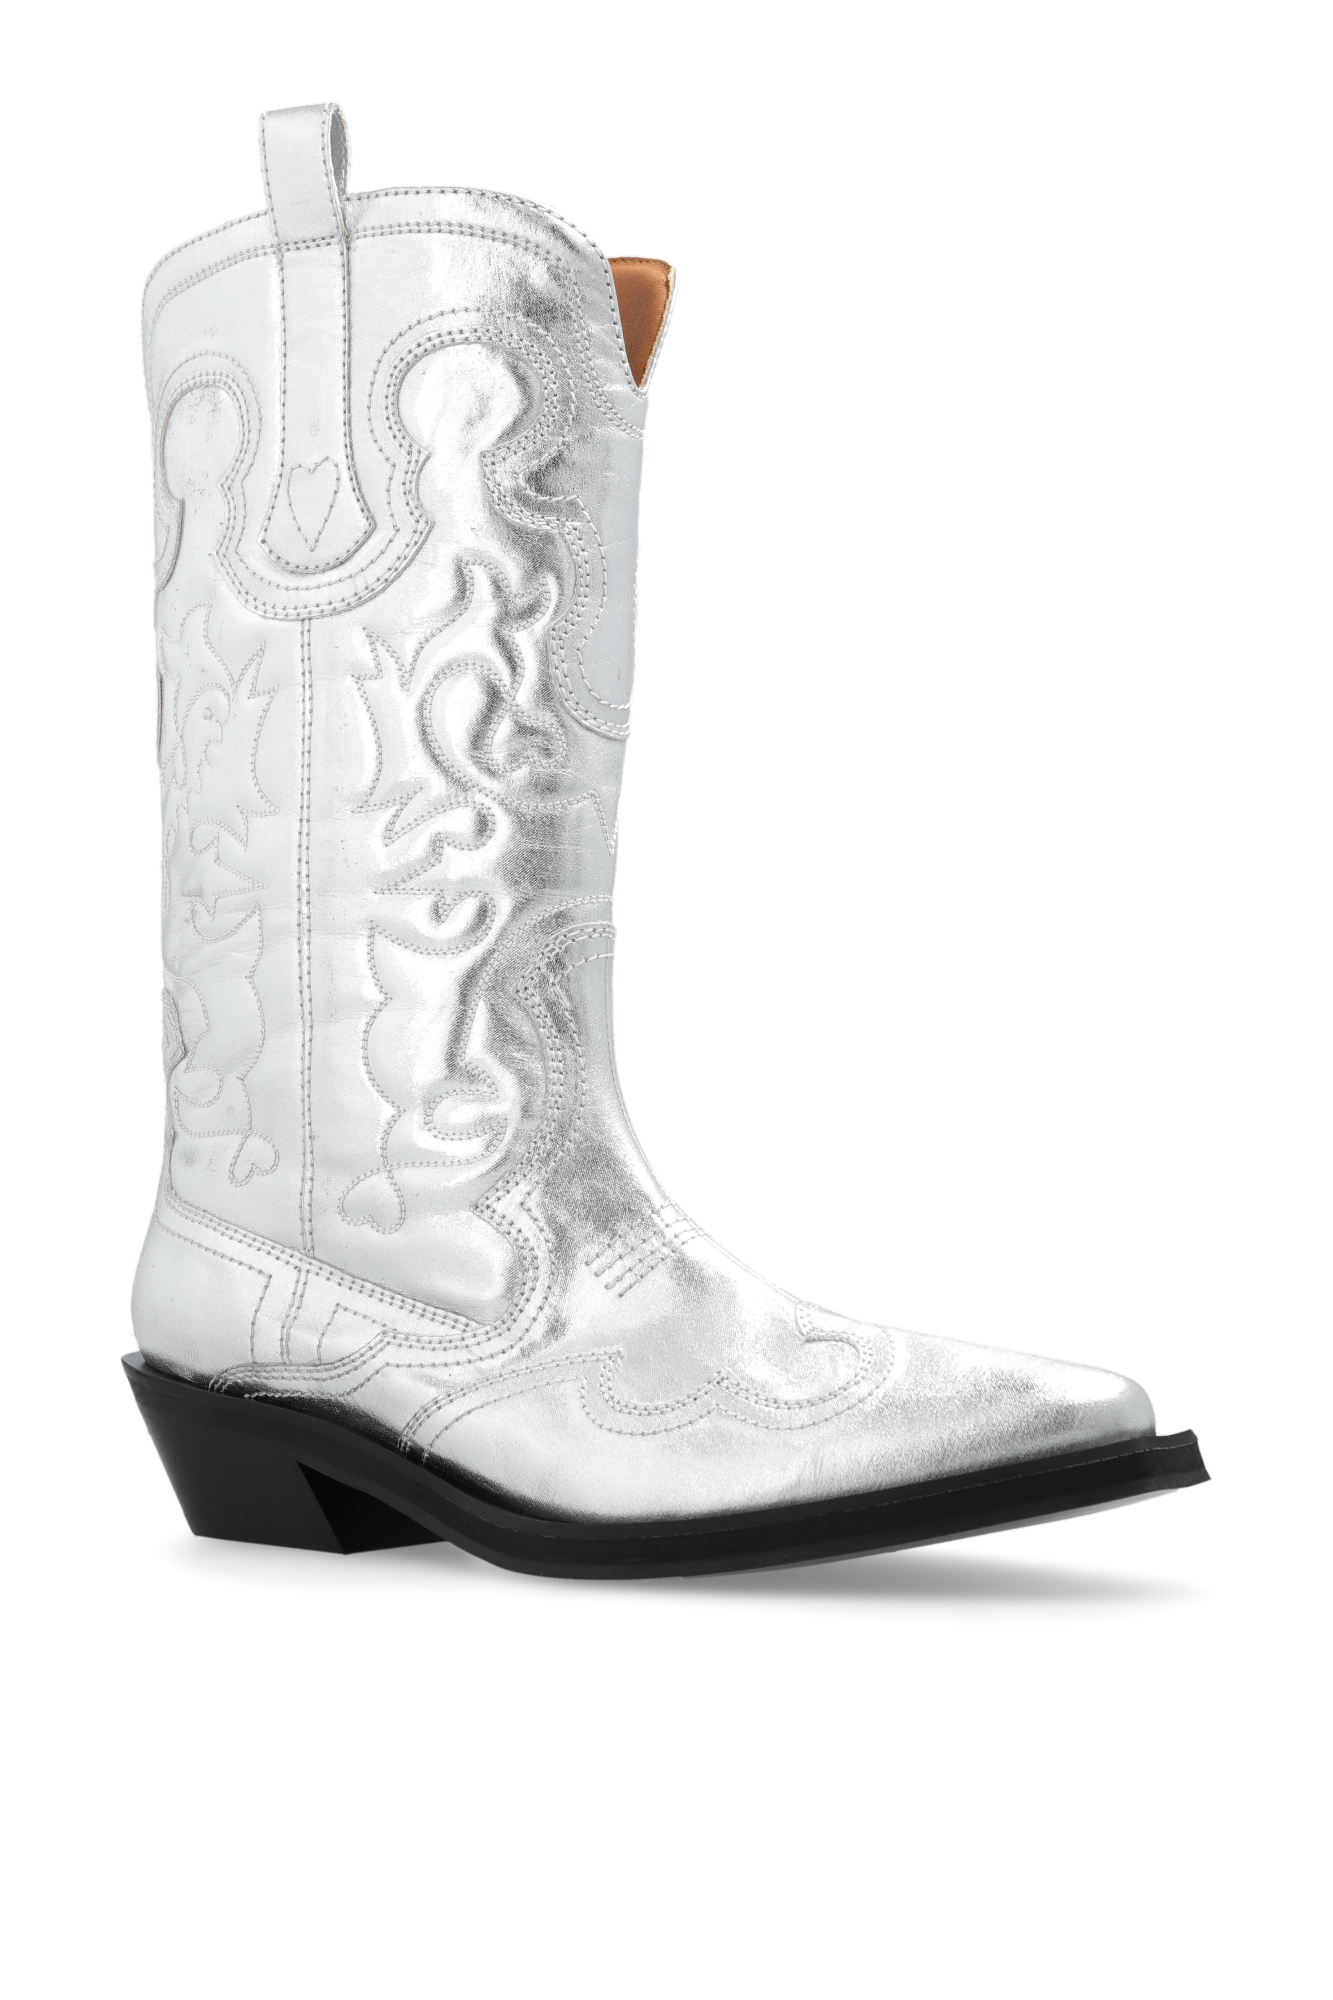 Ganni Cowboy boots with stitching details